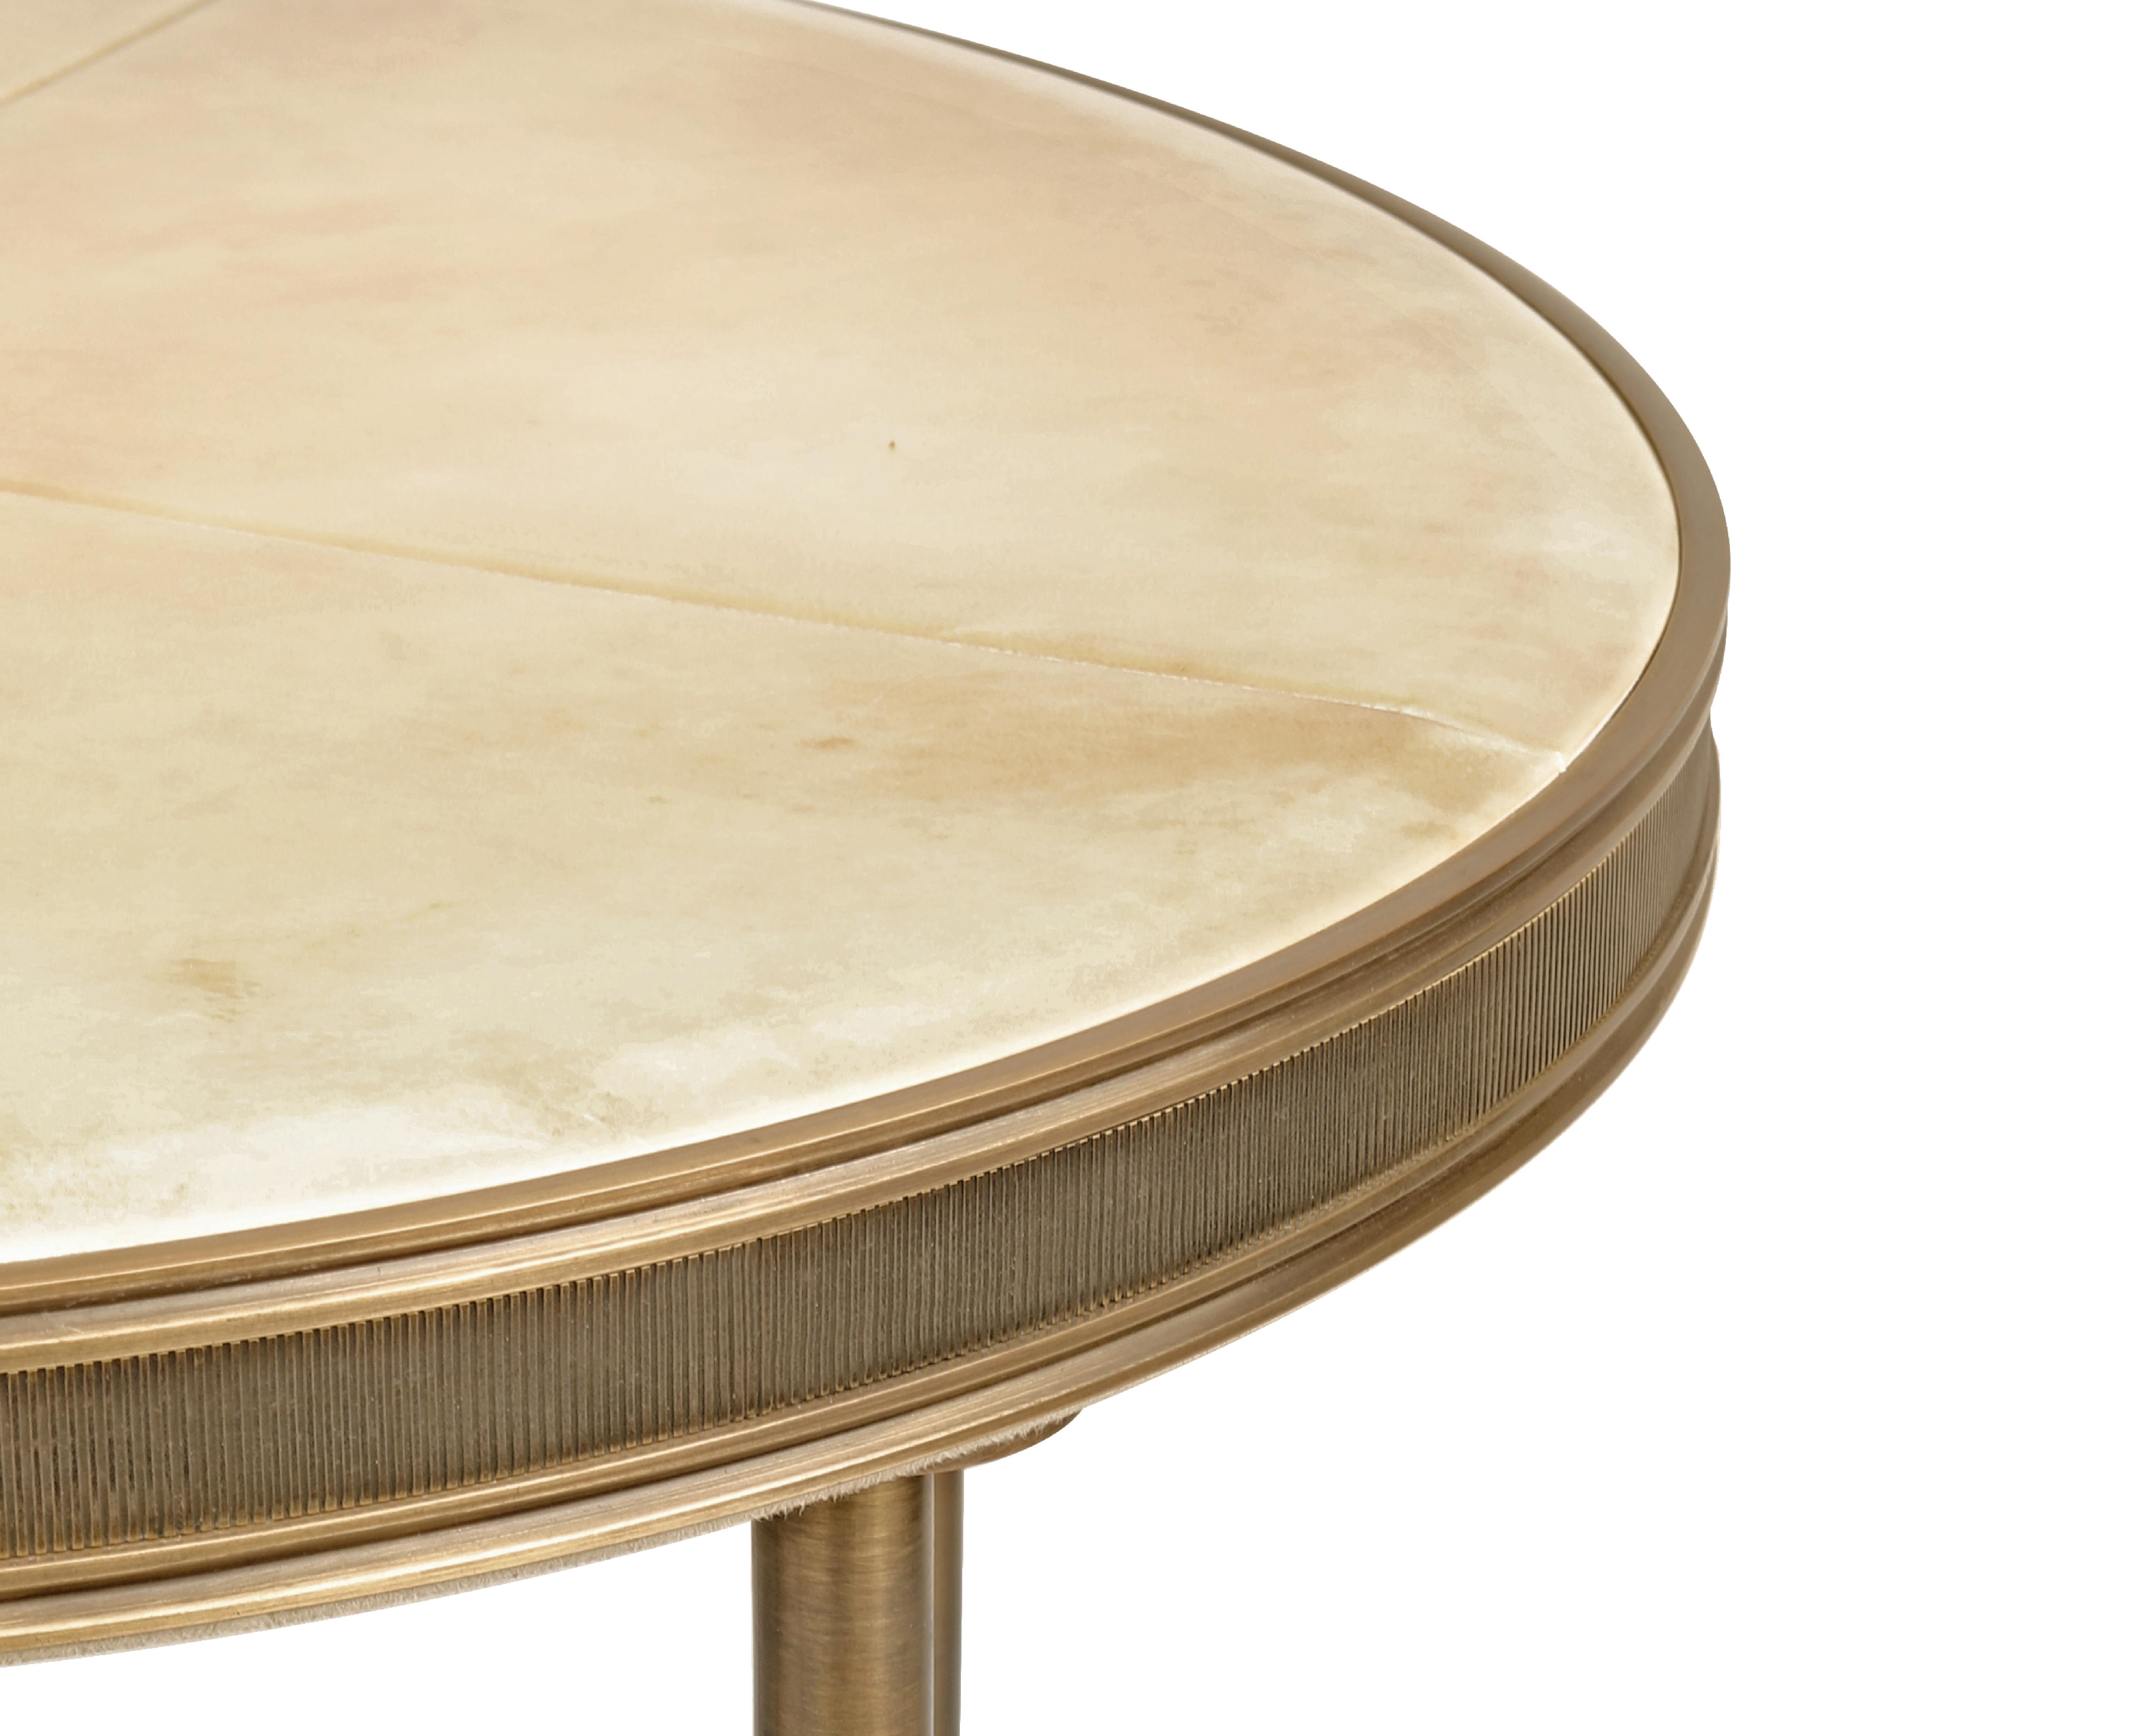 Metal Bronzed Finish Mandel Round Table by Madheke For Sale